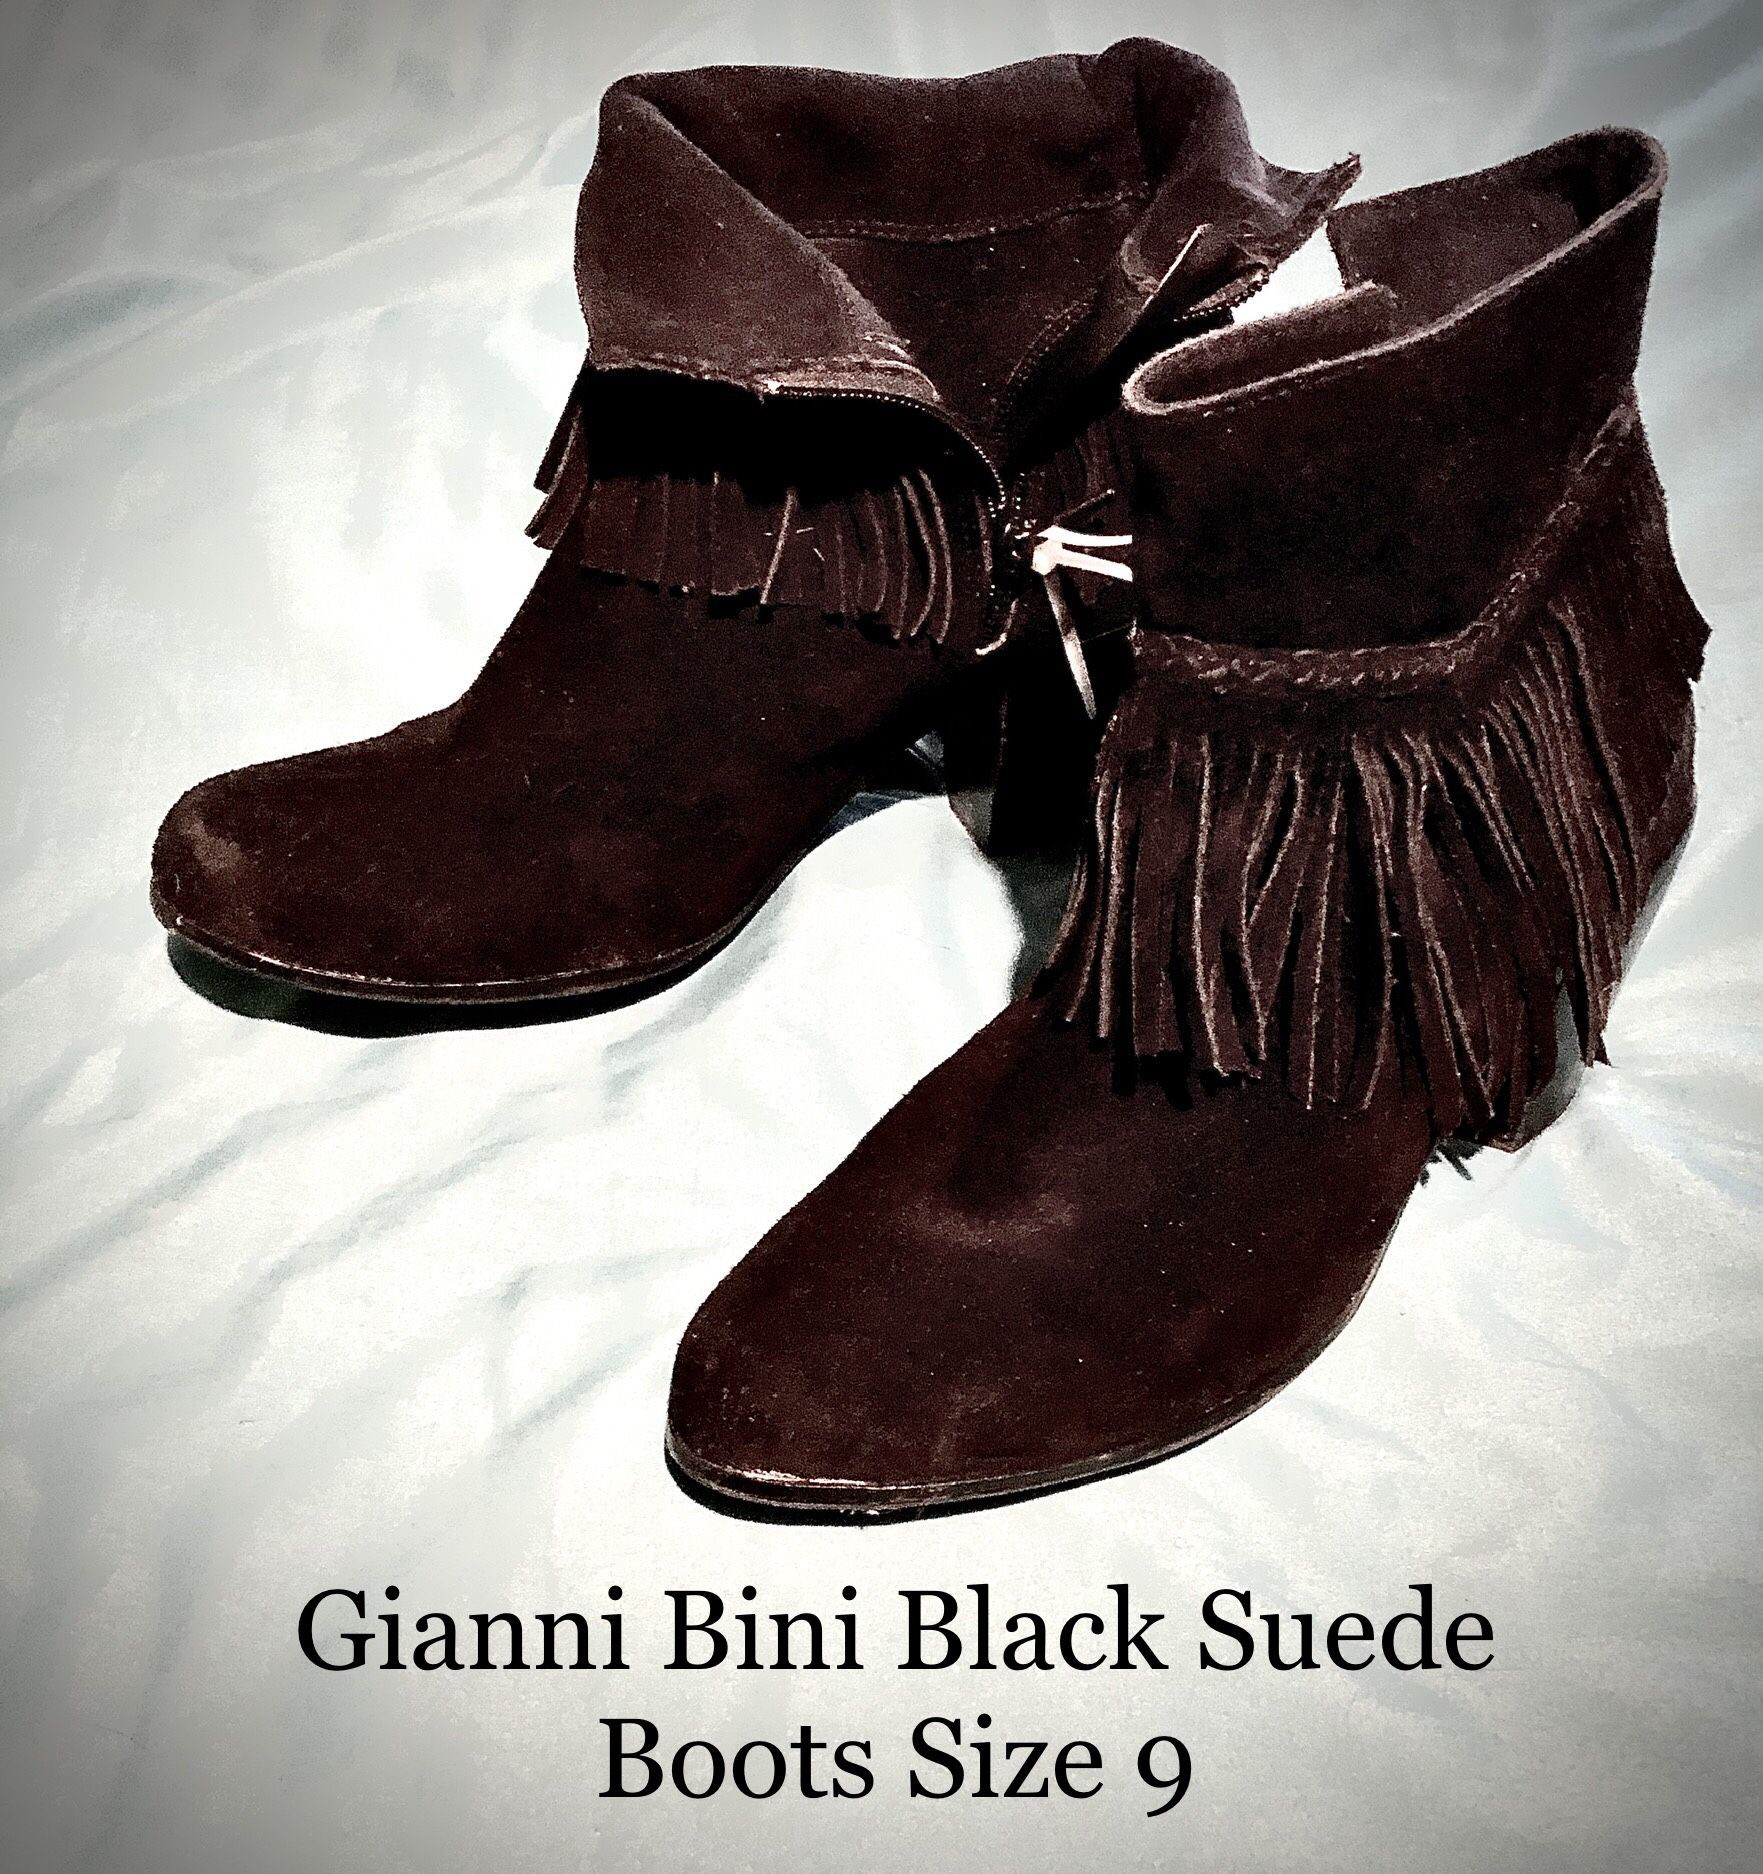 Gianni Bini Black Suede Boots with Fringe